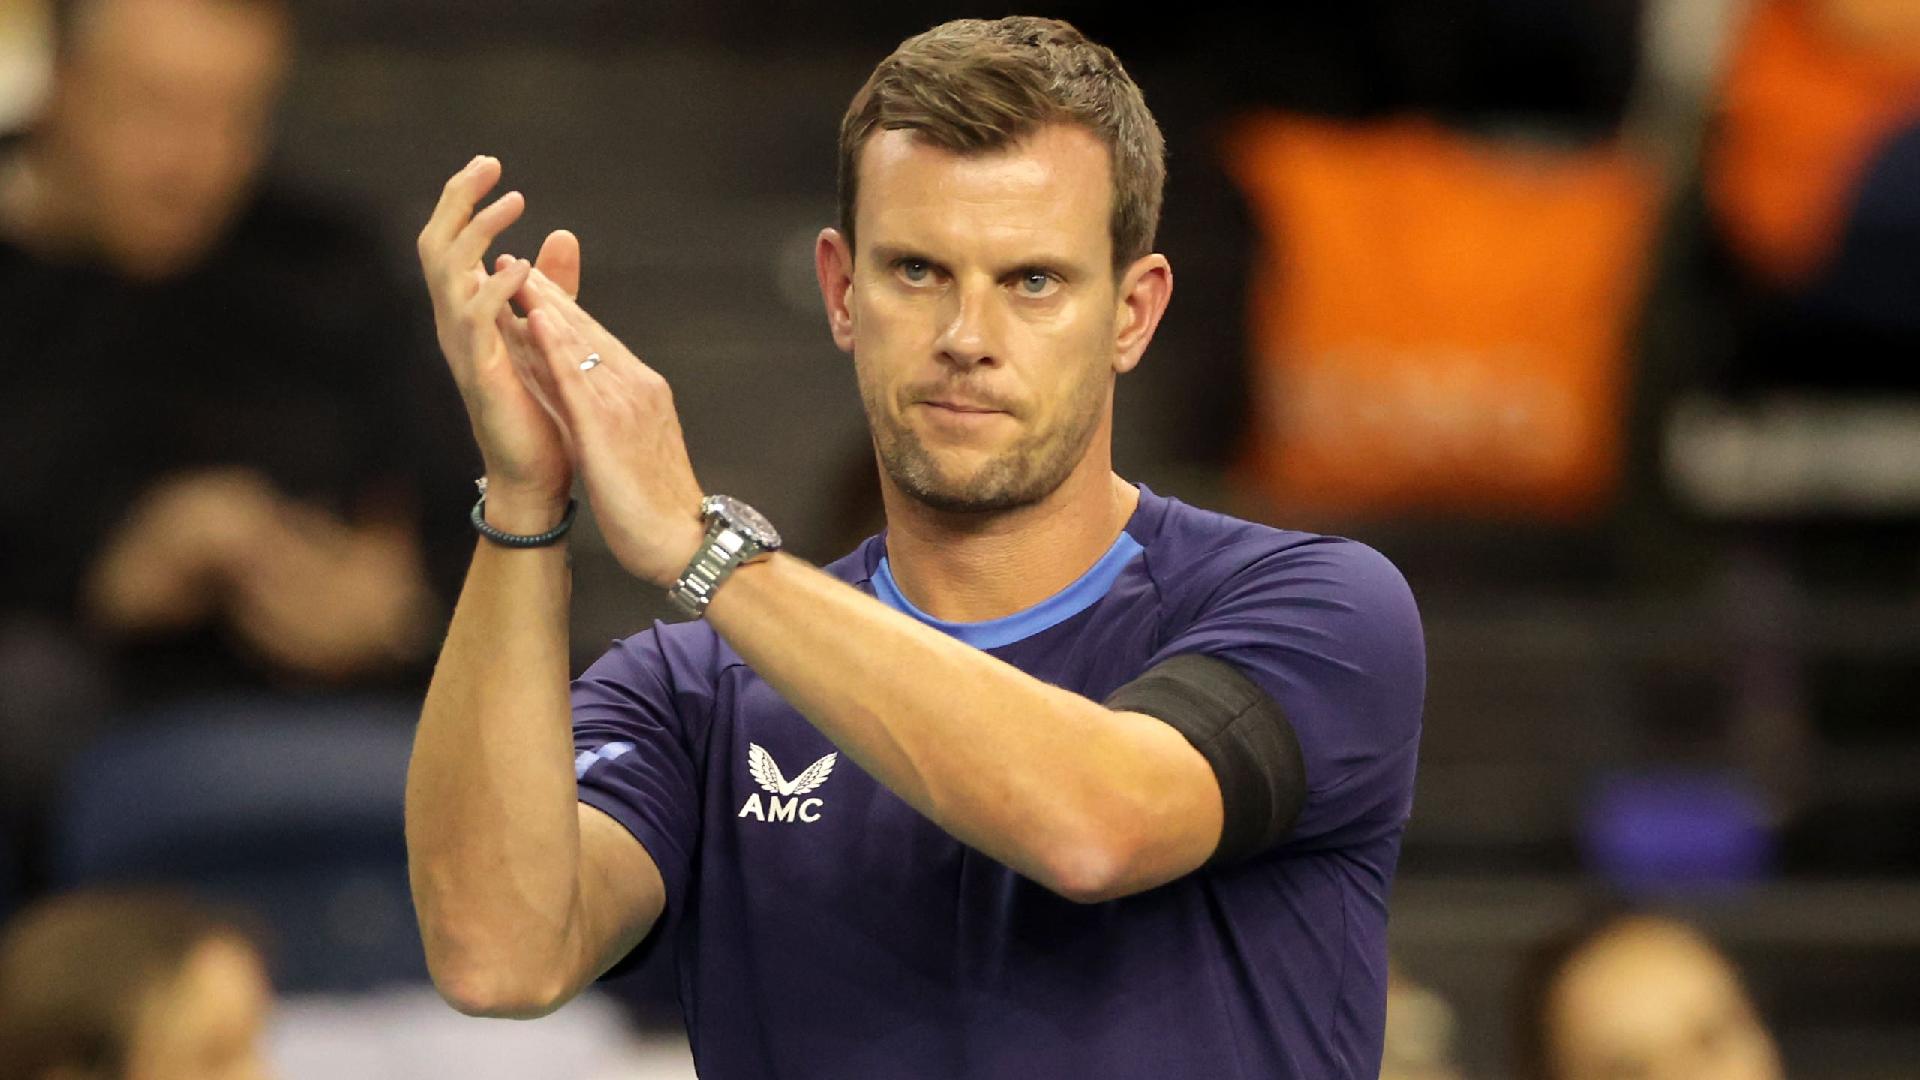 Great Britain face winner-takes-all Davis Cup clash with France on Sunday